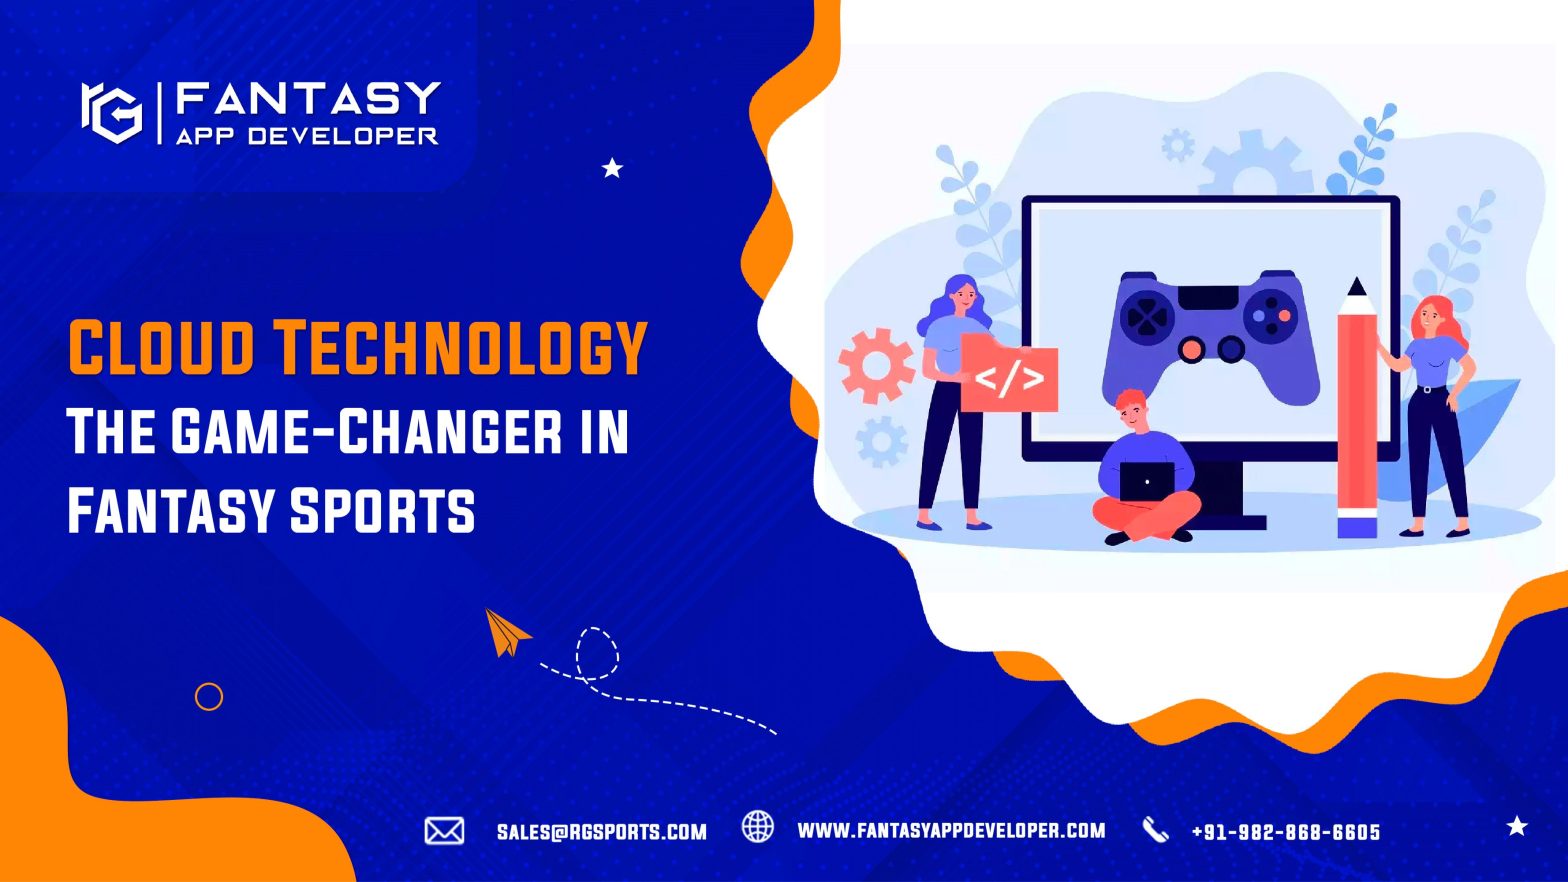 Cloud Technology The Game-Changer in Fantasy Sports